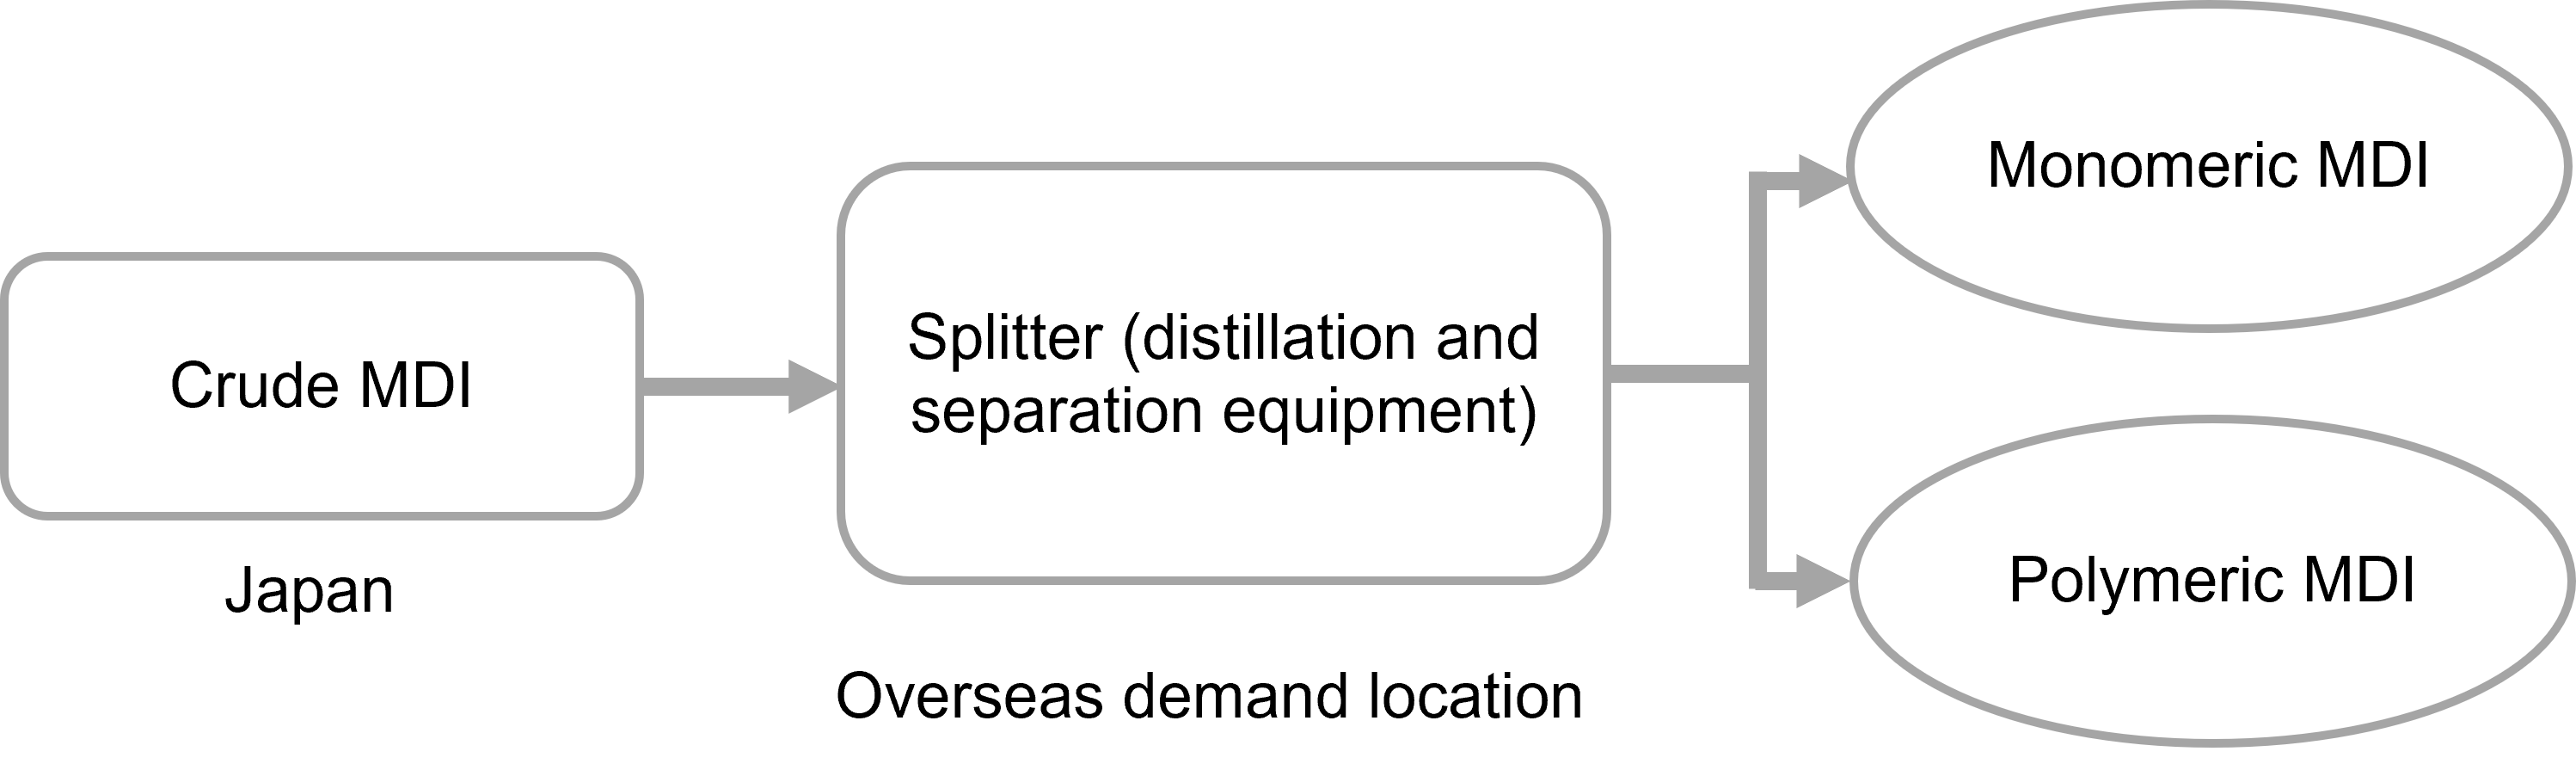 MDI-distillation-and-separation-process-flow-chart.png